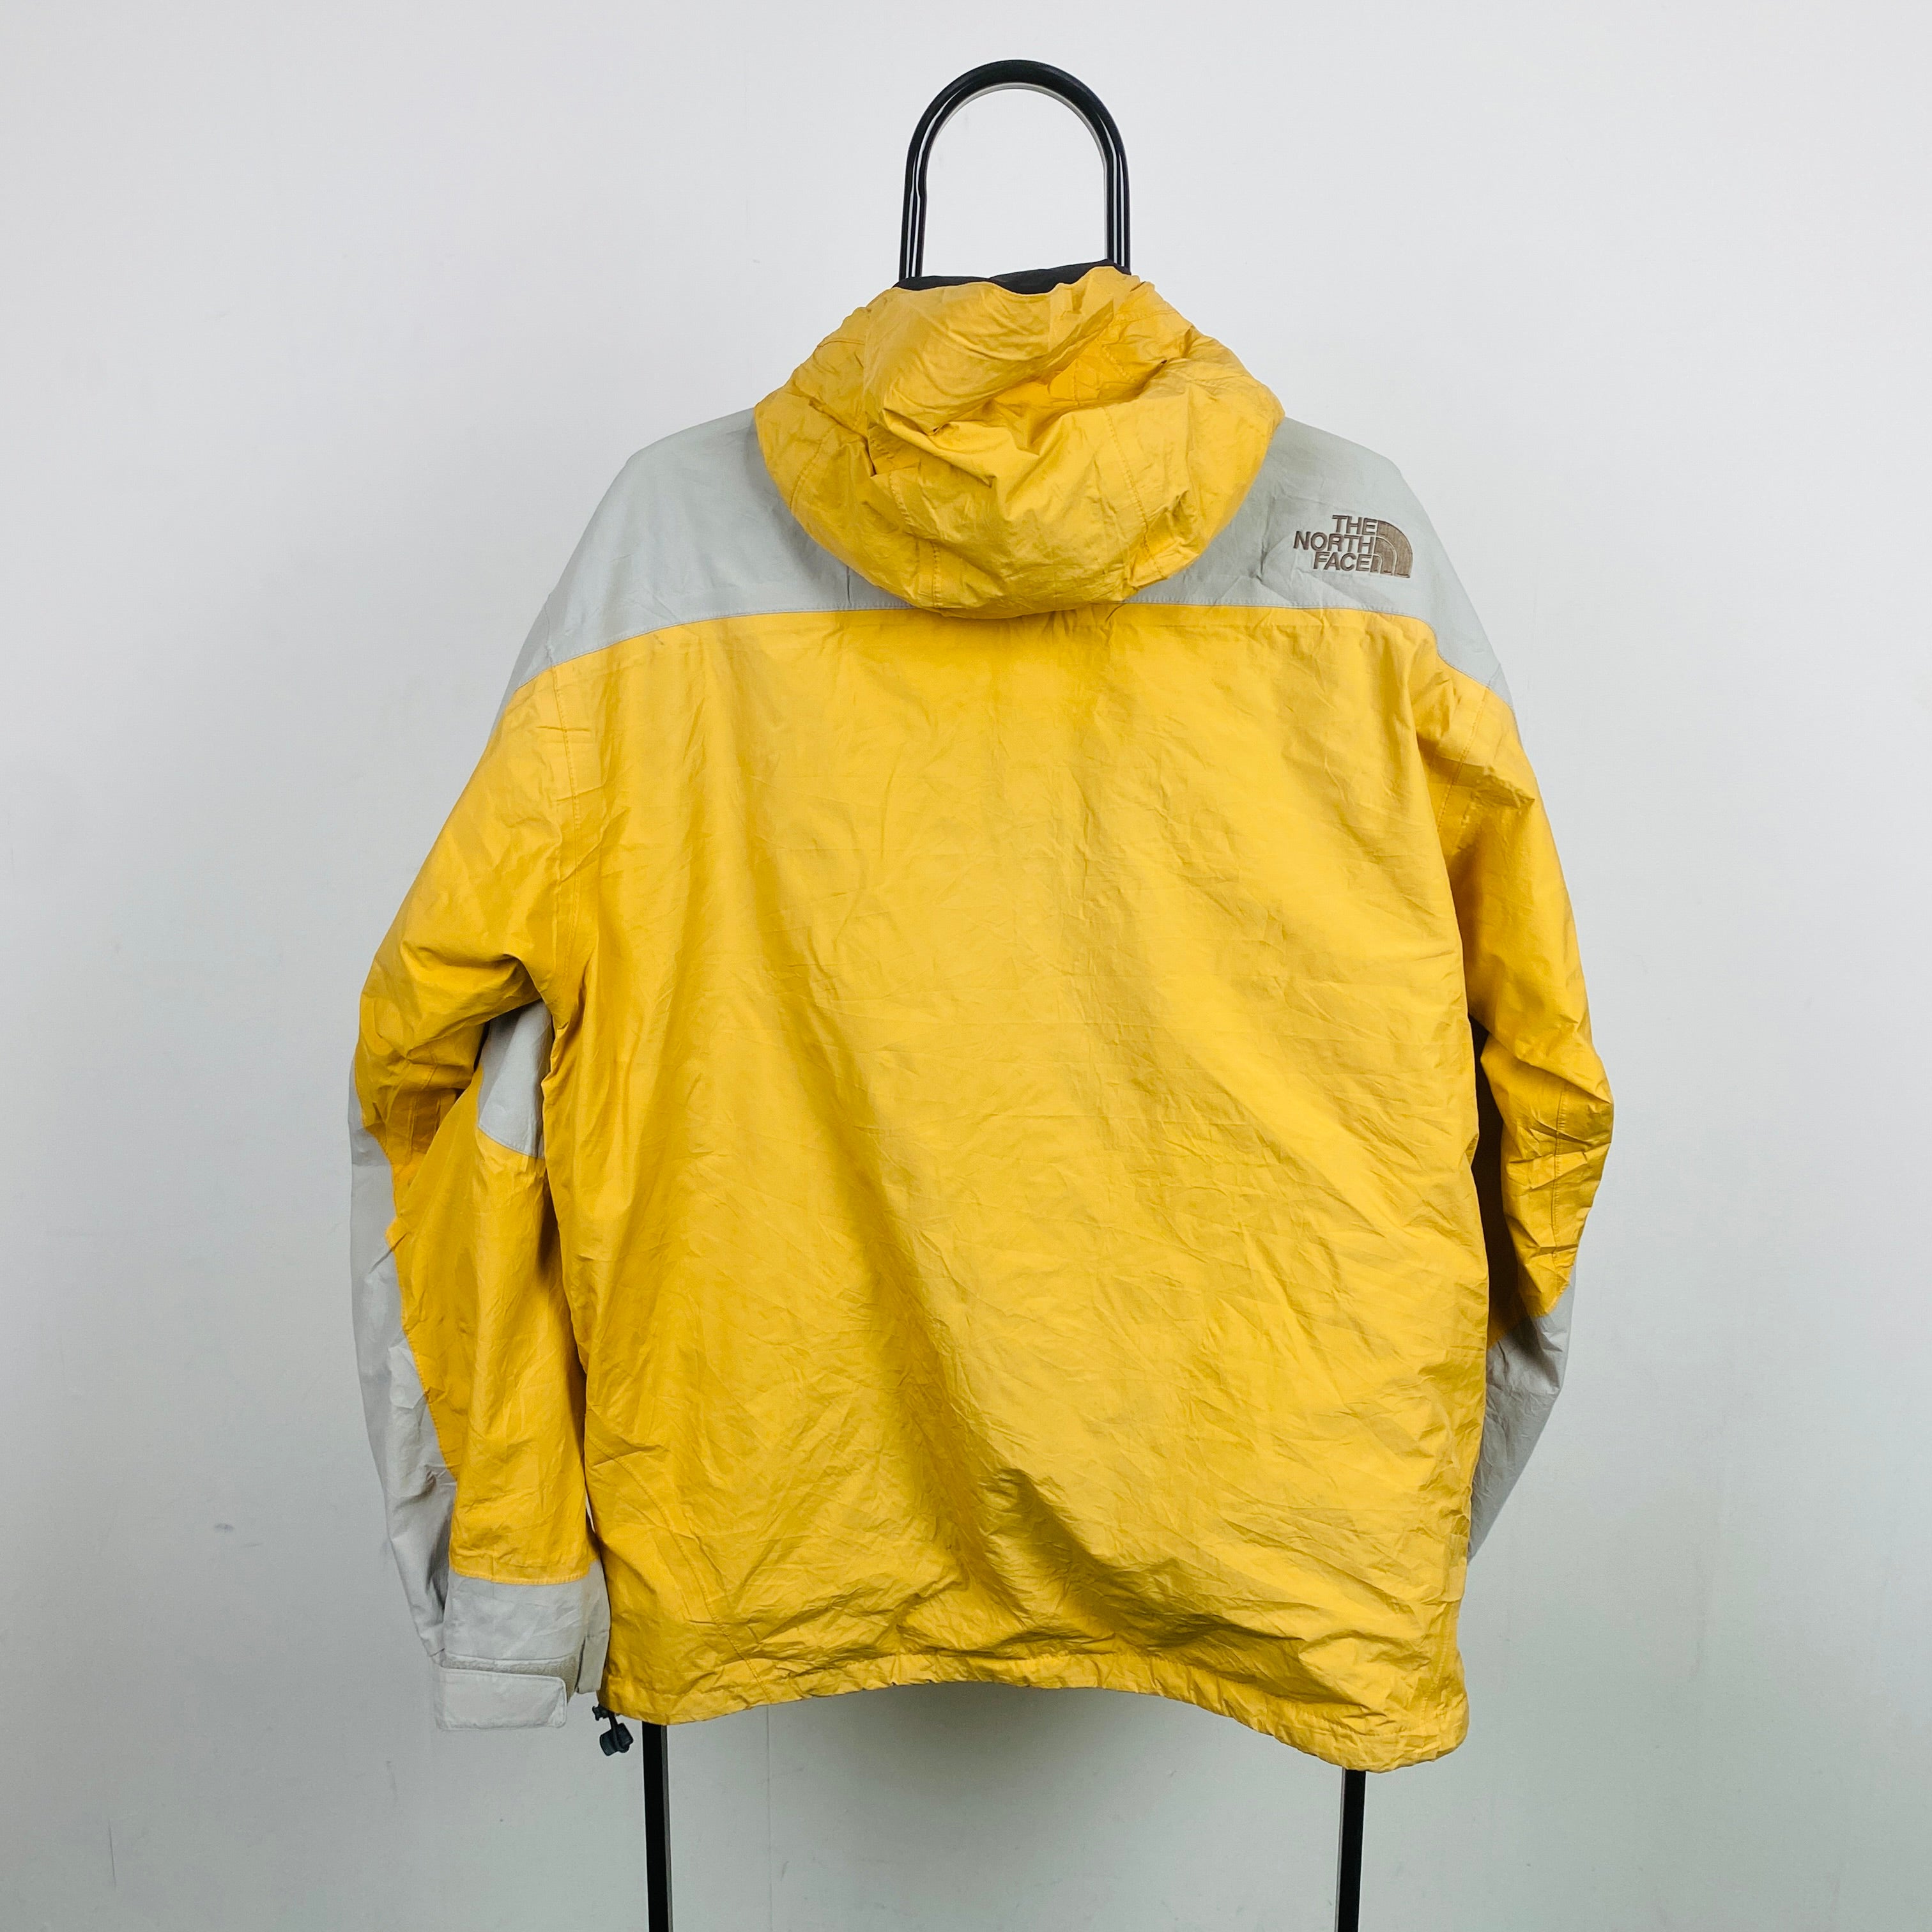 Retro The North Face Waterproof Coat Jacket Yellow Large